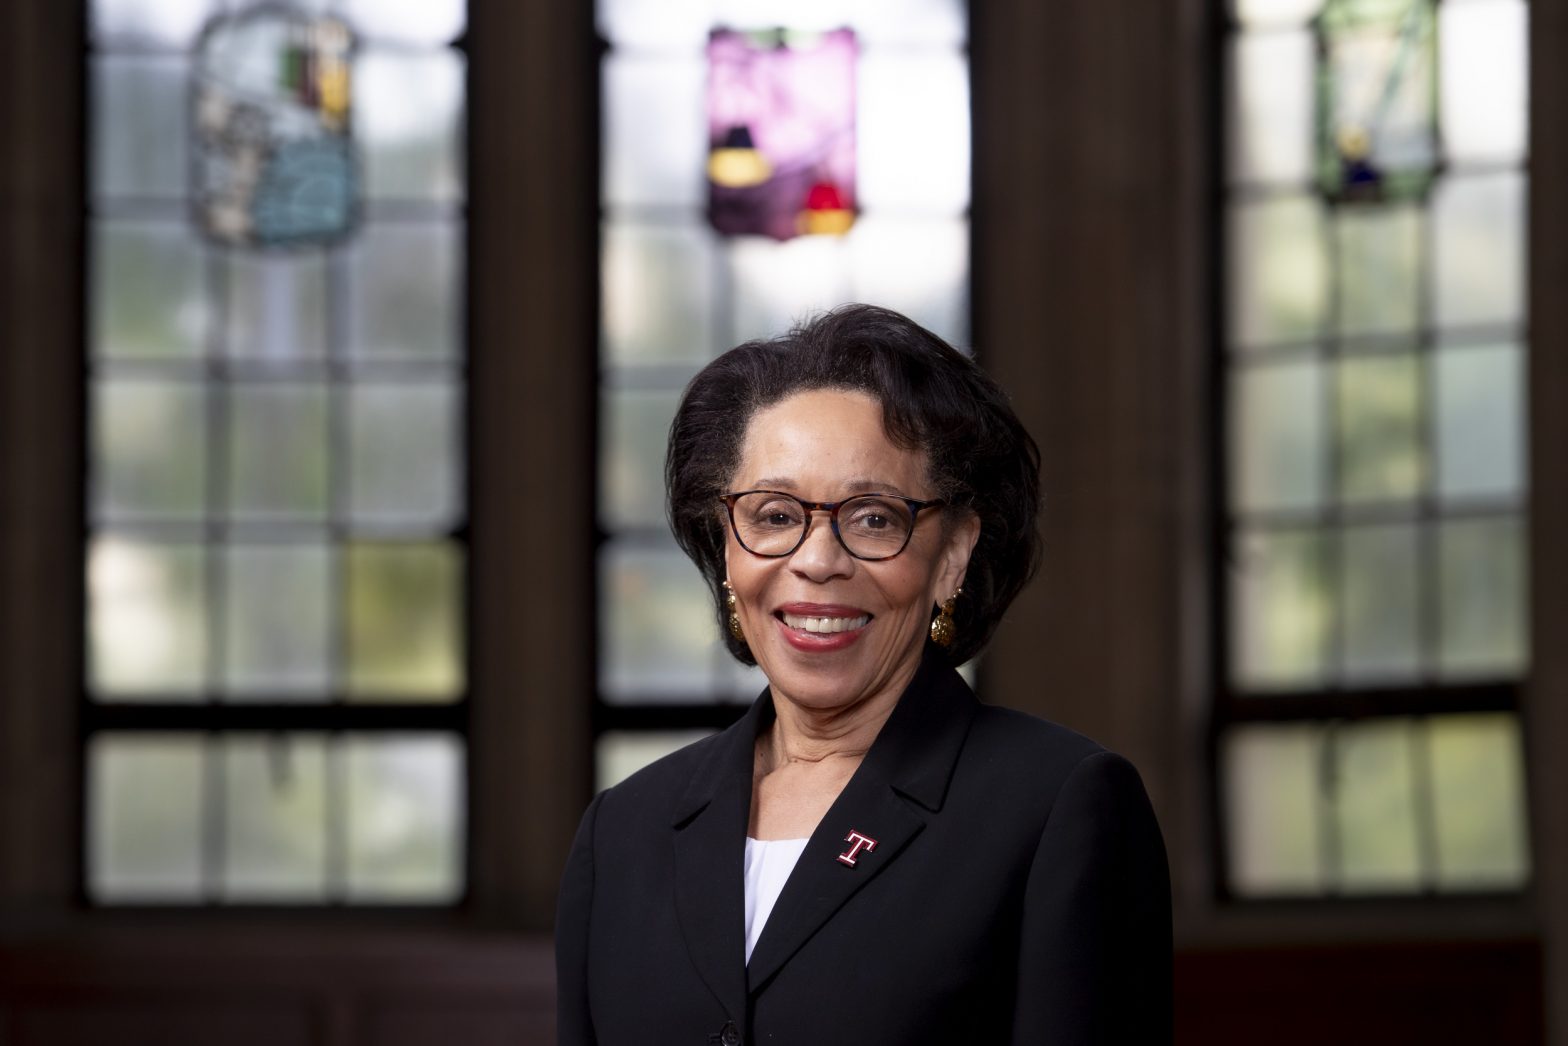 Who was JoAnne A. Epps? Temple University acting president dies after collapsing on stage